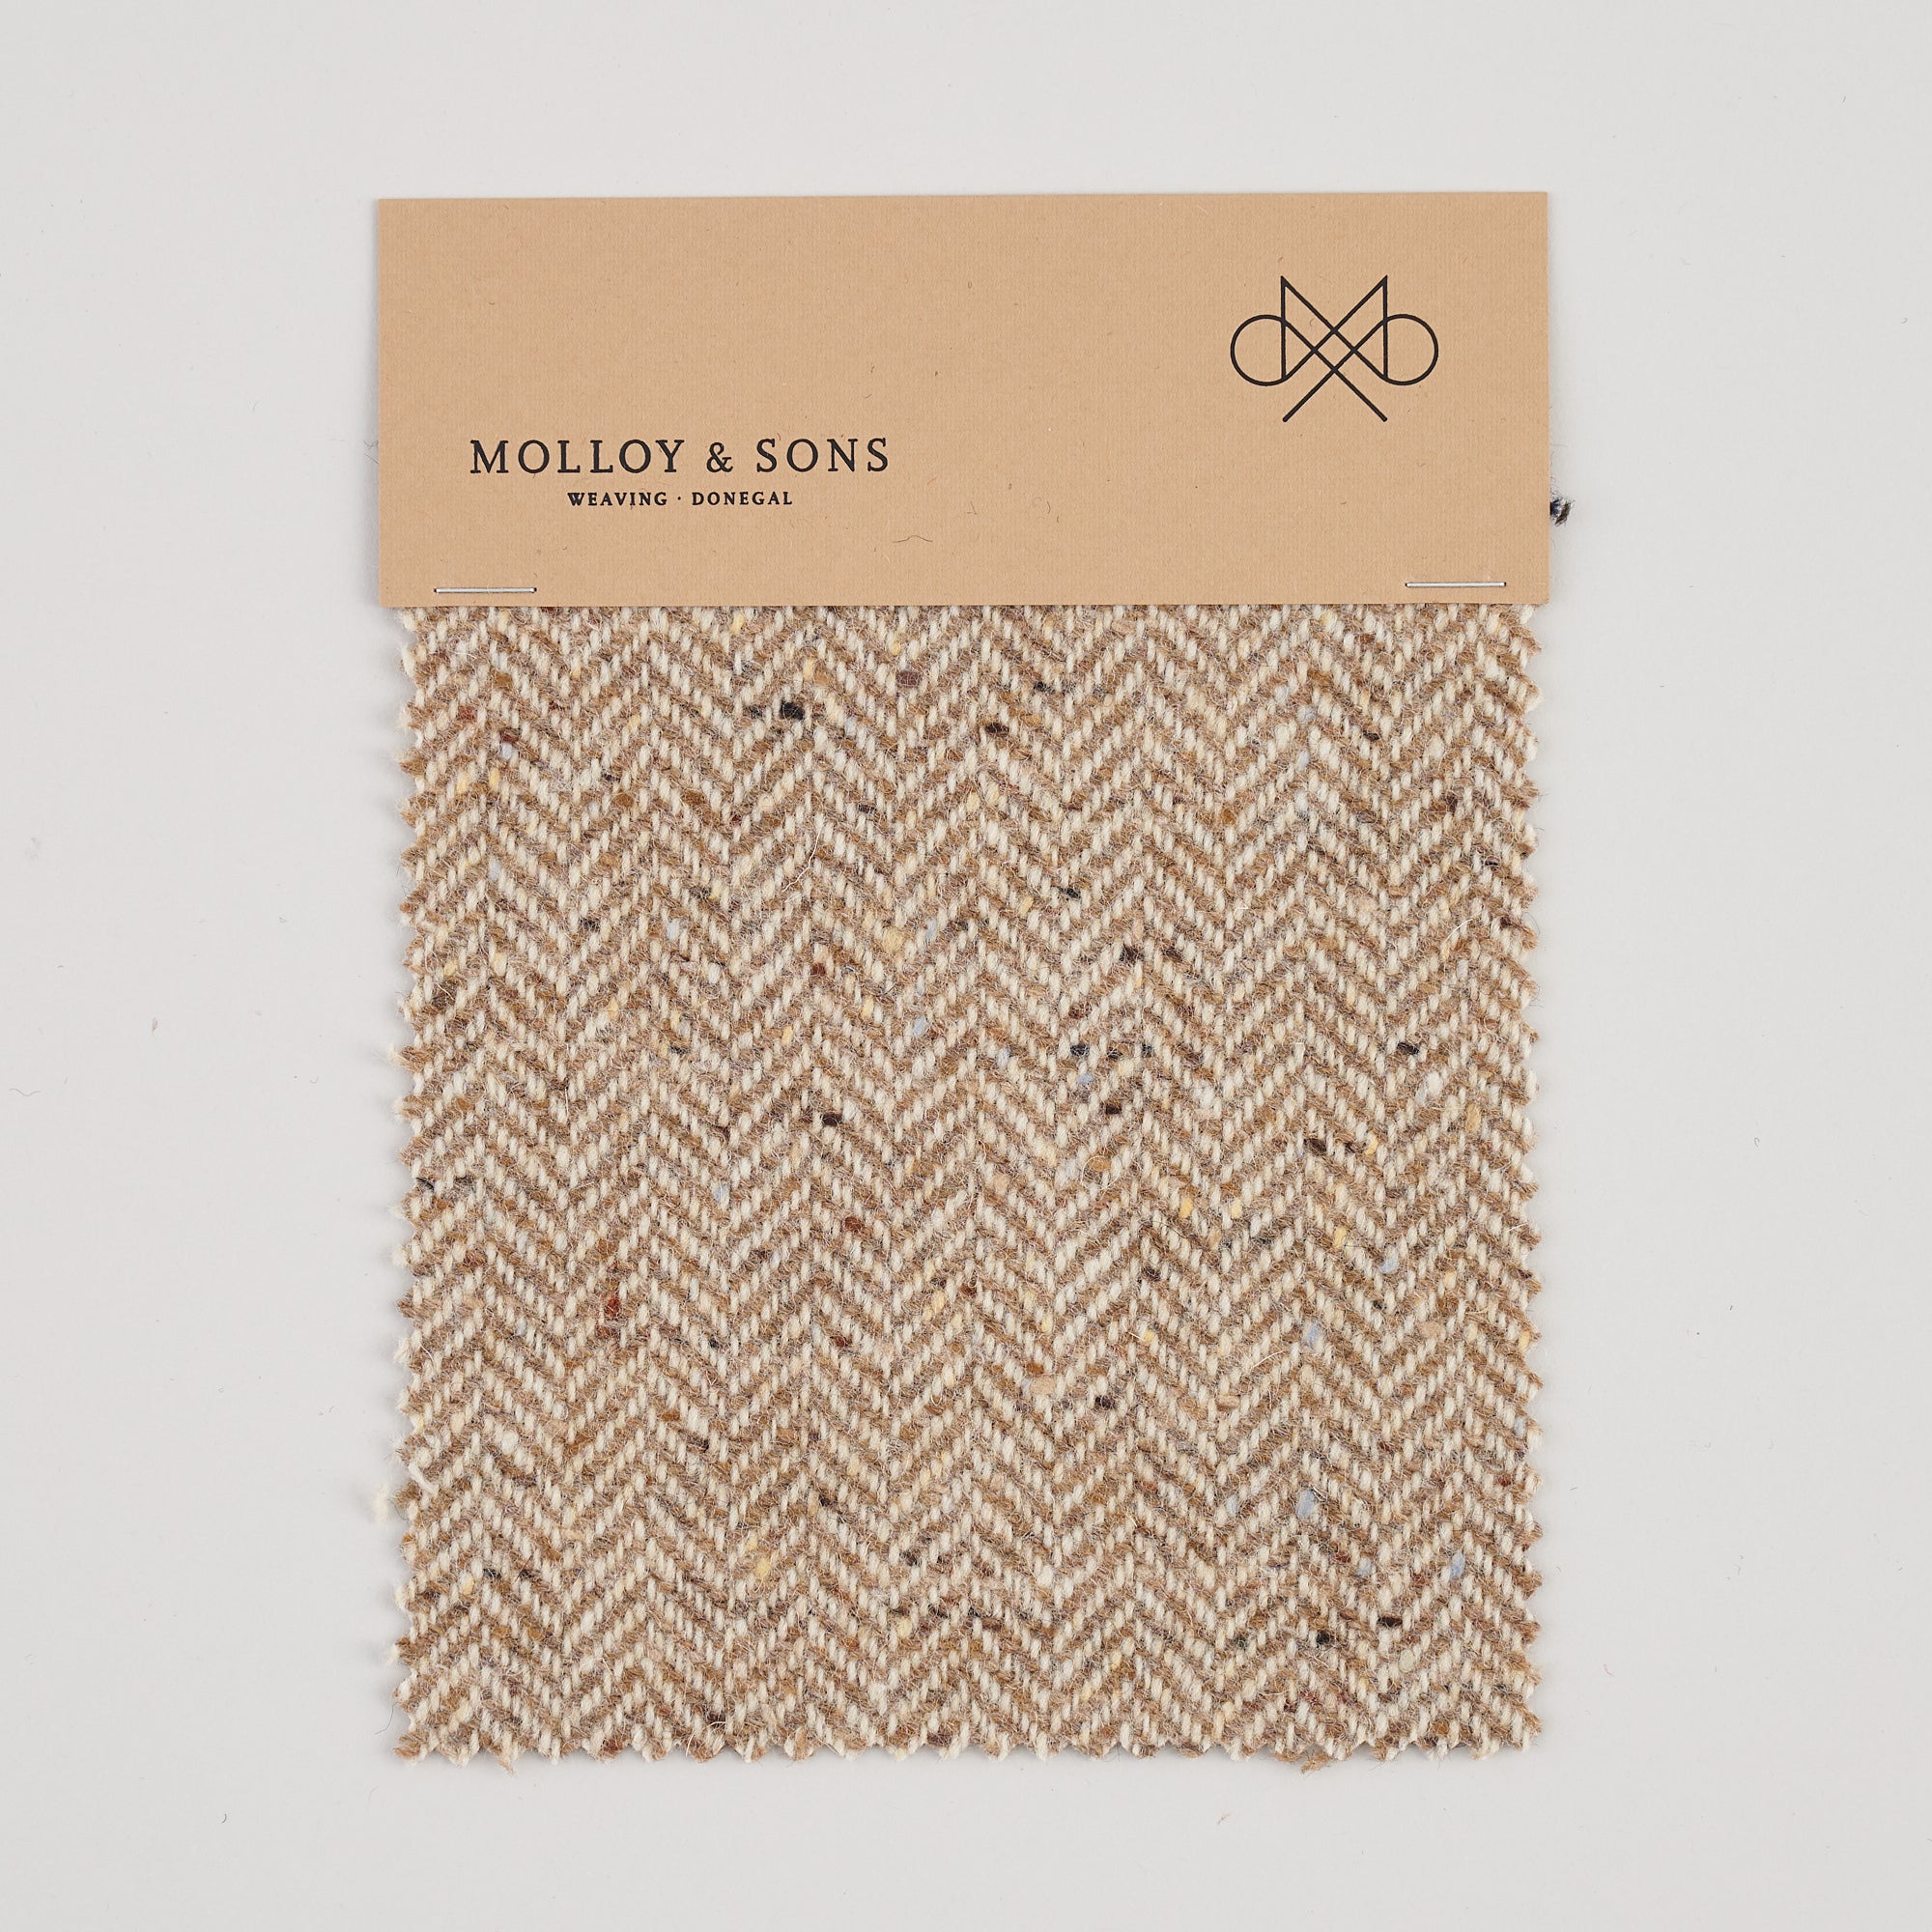 Donegal tweed 0702 04 – Molloy & Sons